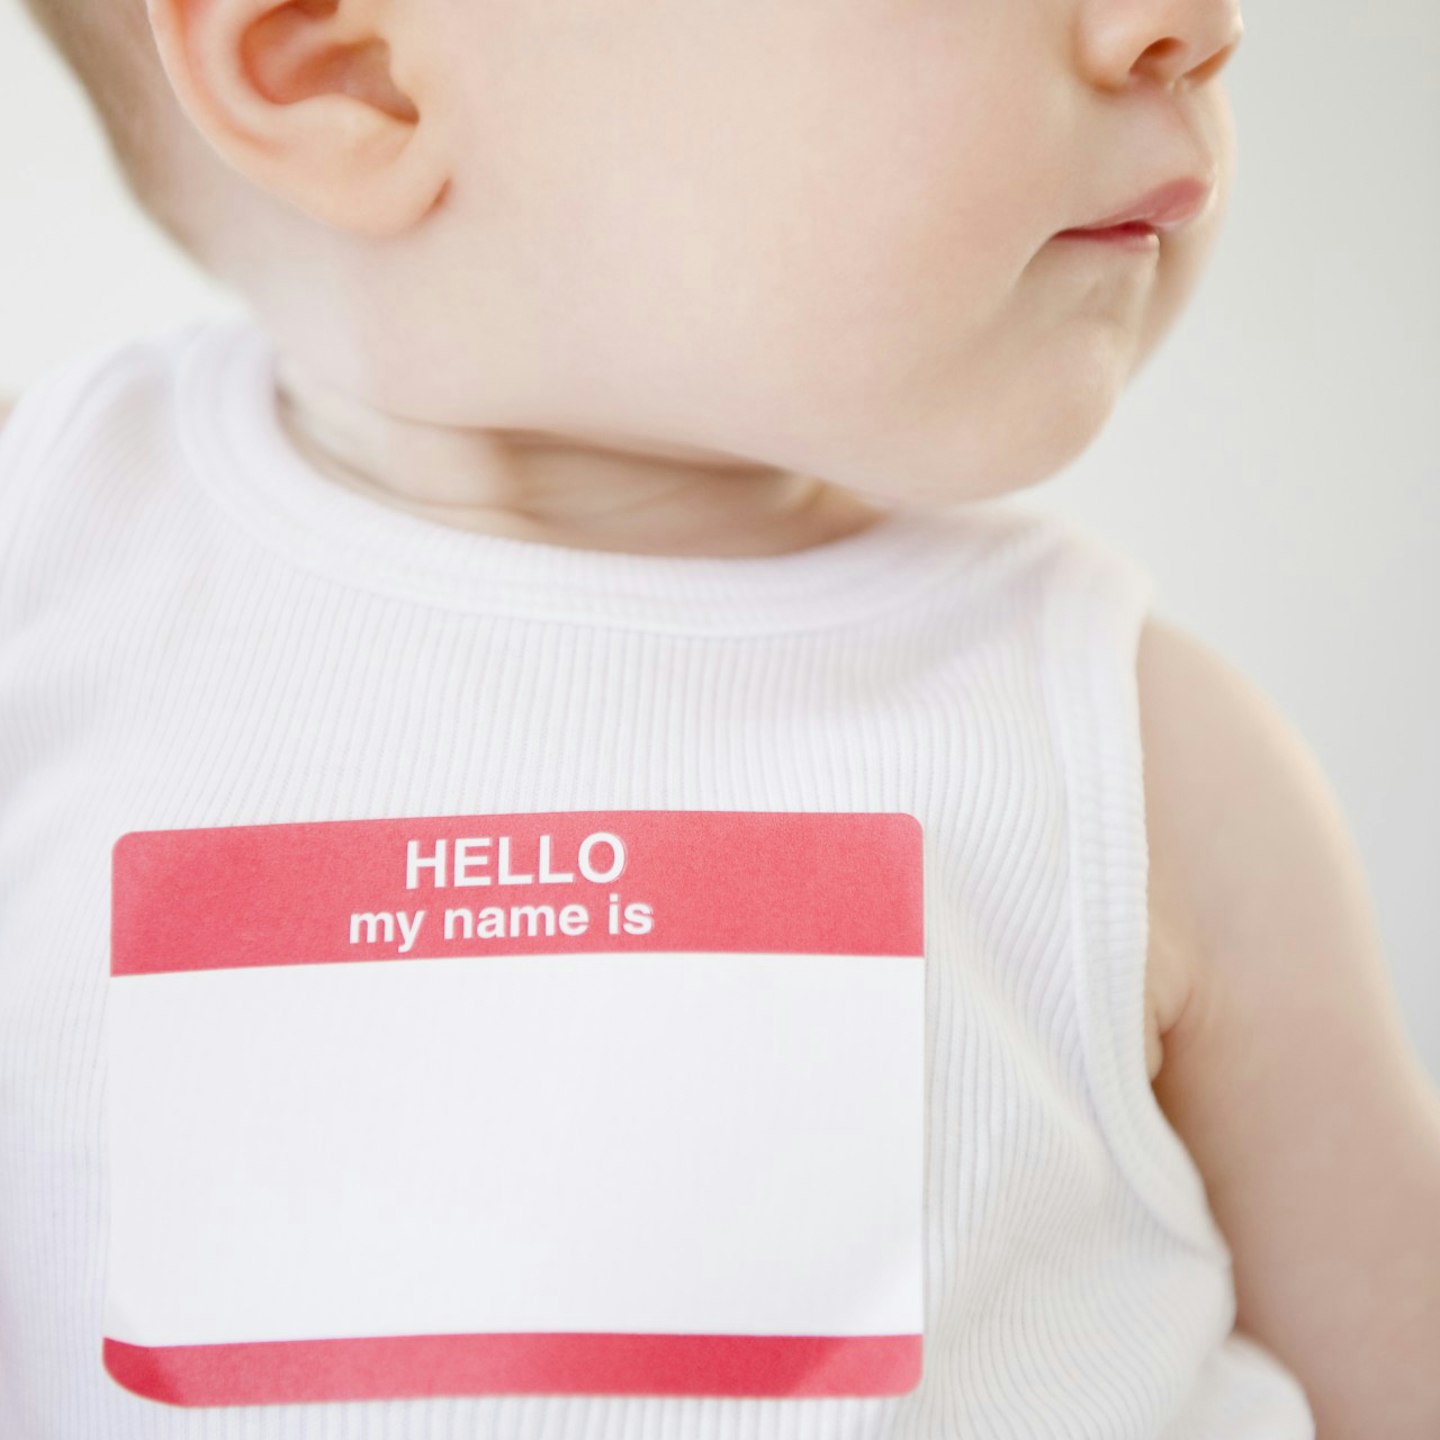 It’s A Girl! The Top 20 Baby Girl Names For 2013